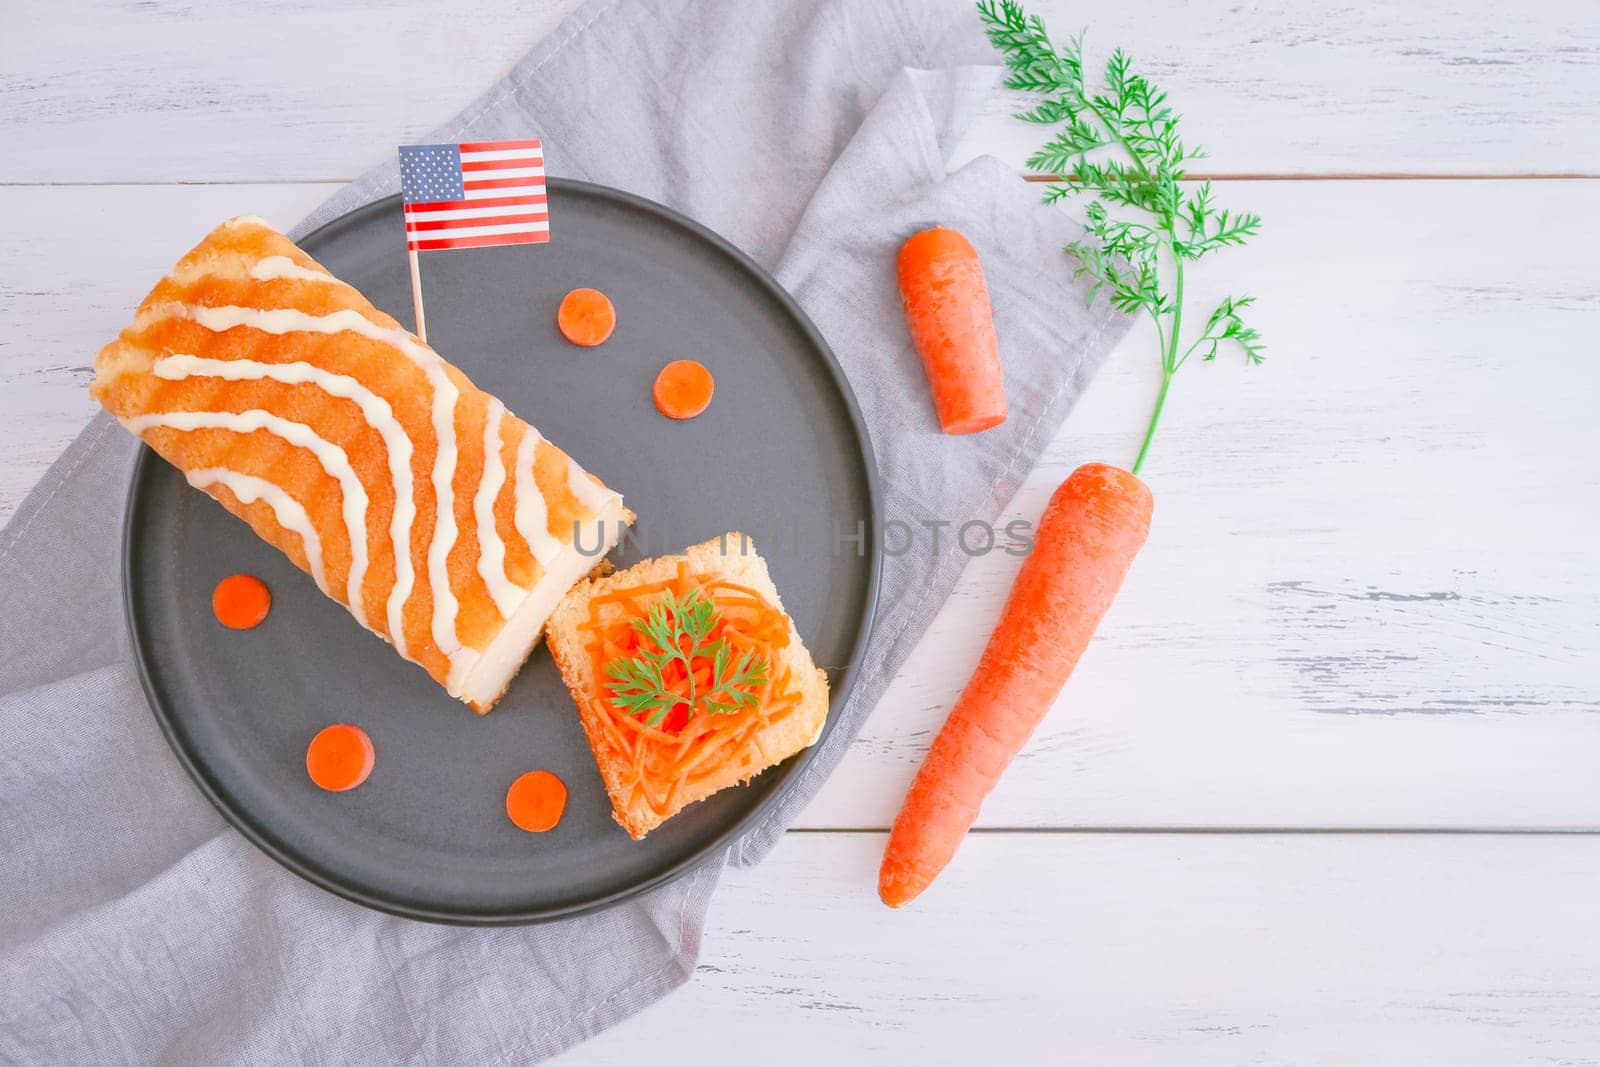 A delicious cake with sugar icing, fresh carrots, American flag paper and a cut piece in a plate lies on a wooden table on the left with space for text on the right, top view, close-up. Carrot cake national day concept.